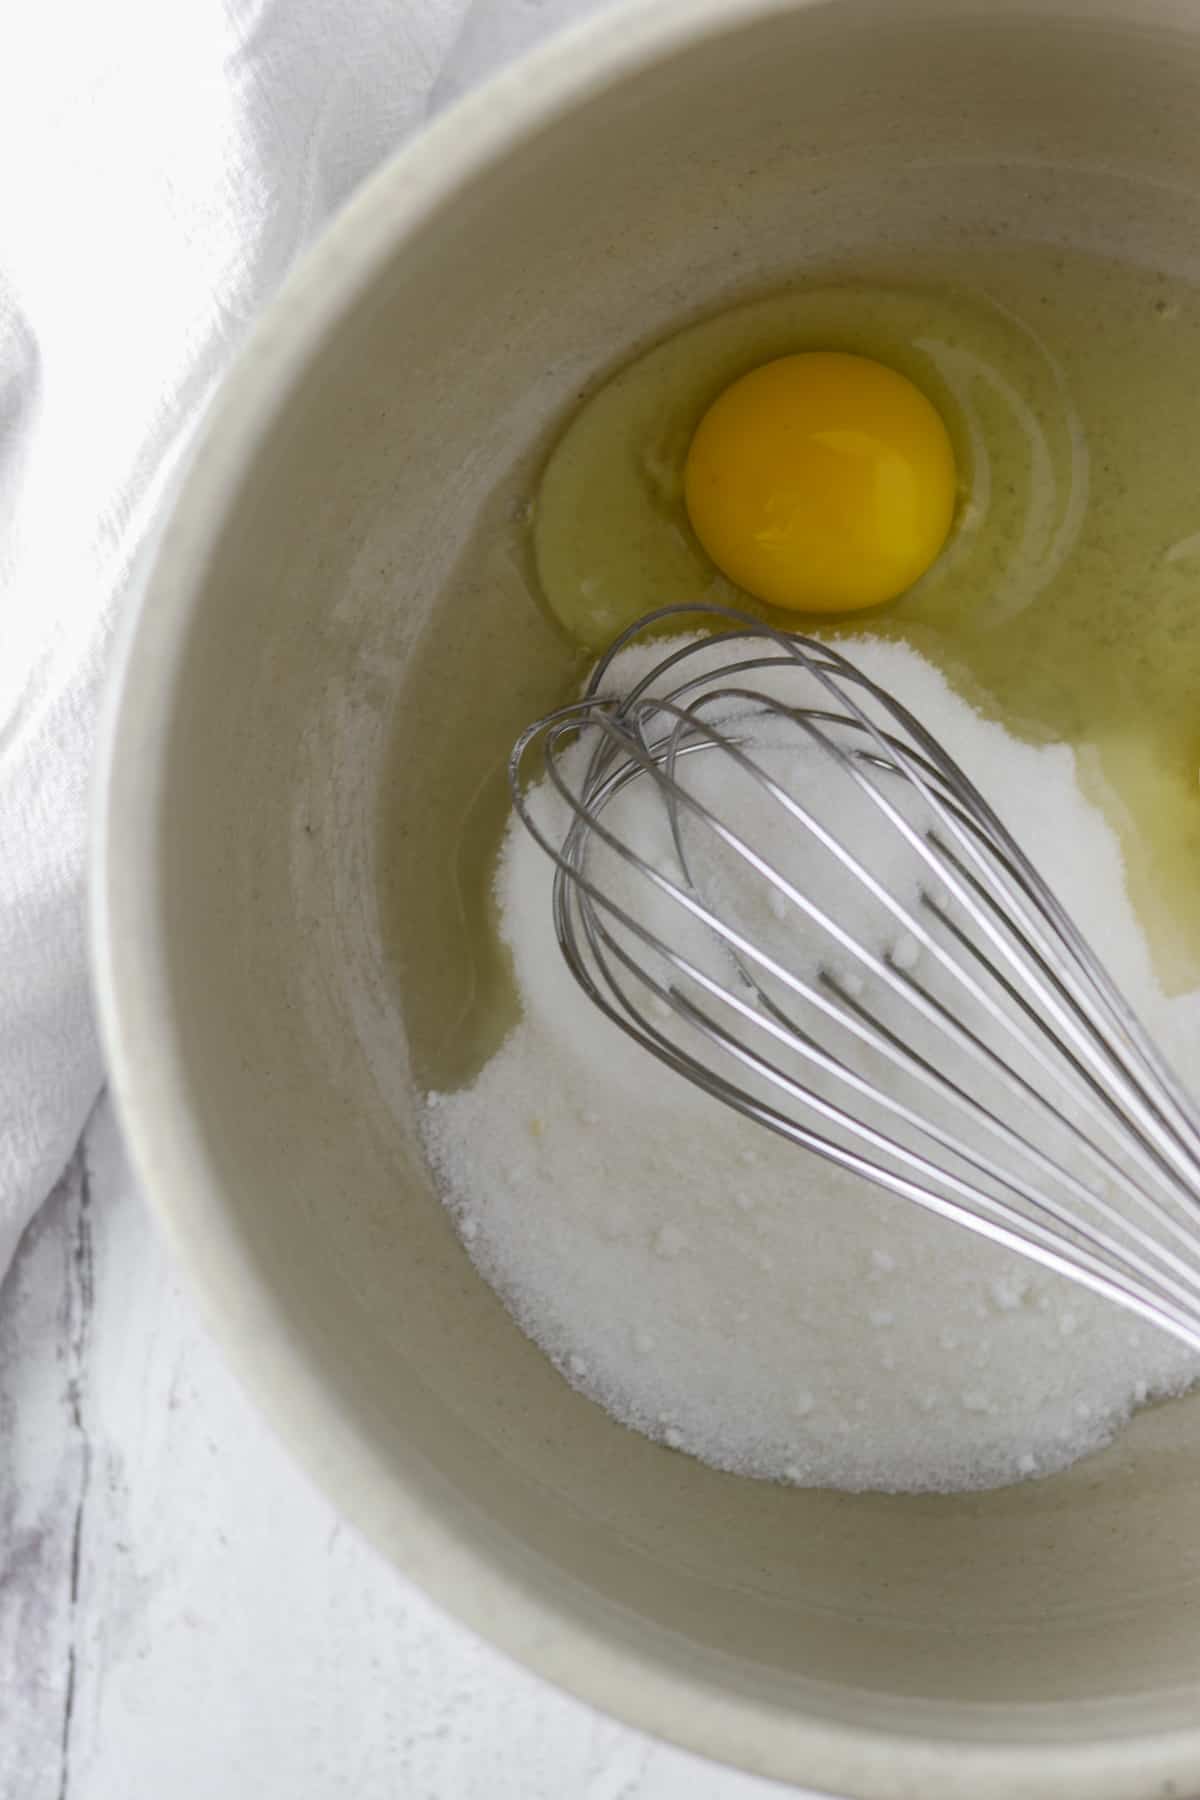 Sugar and egg in a bowl with a whisk.